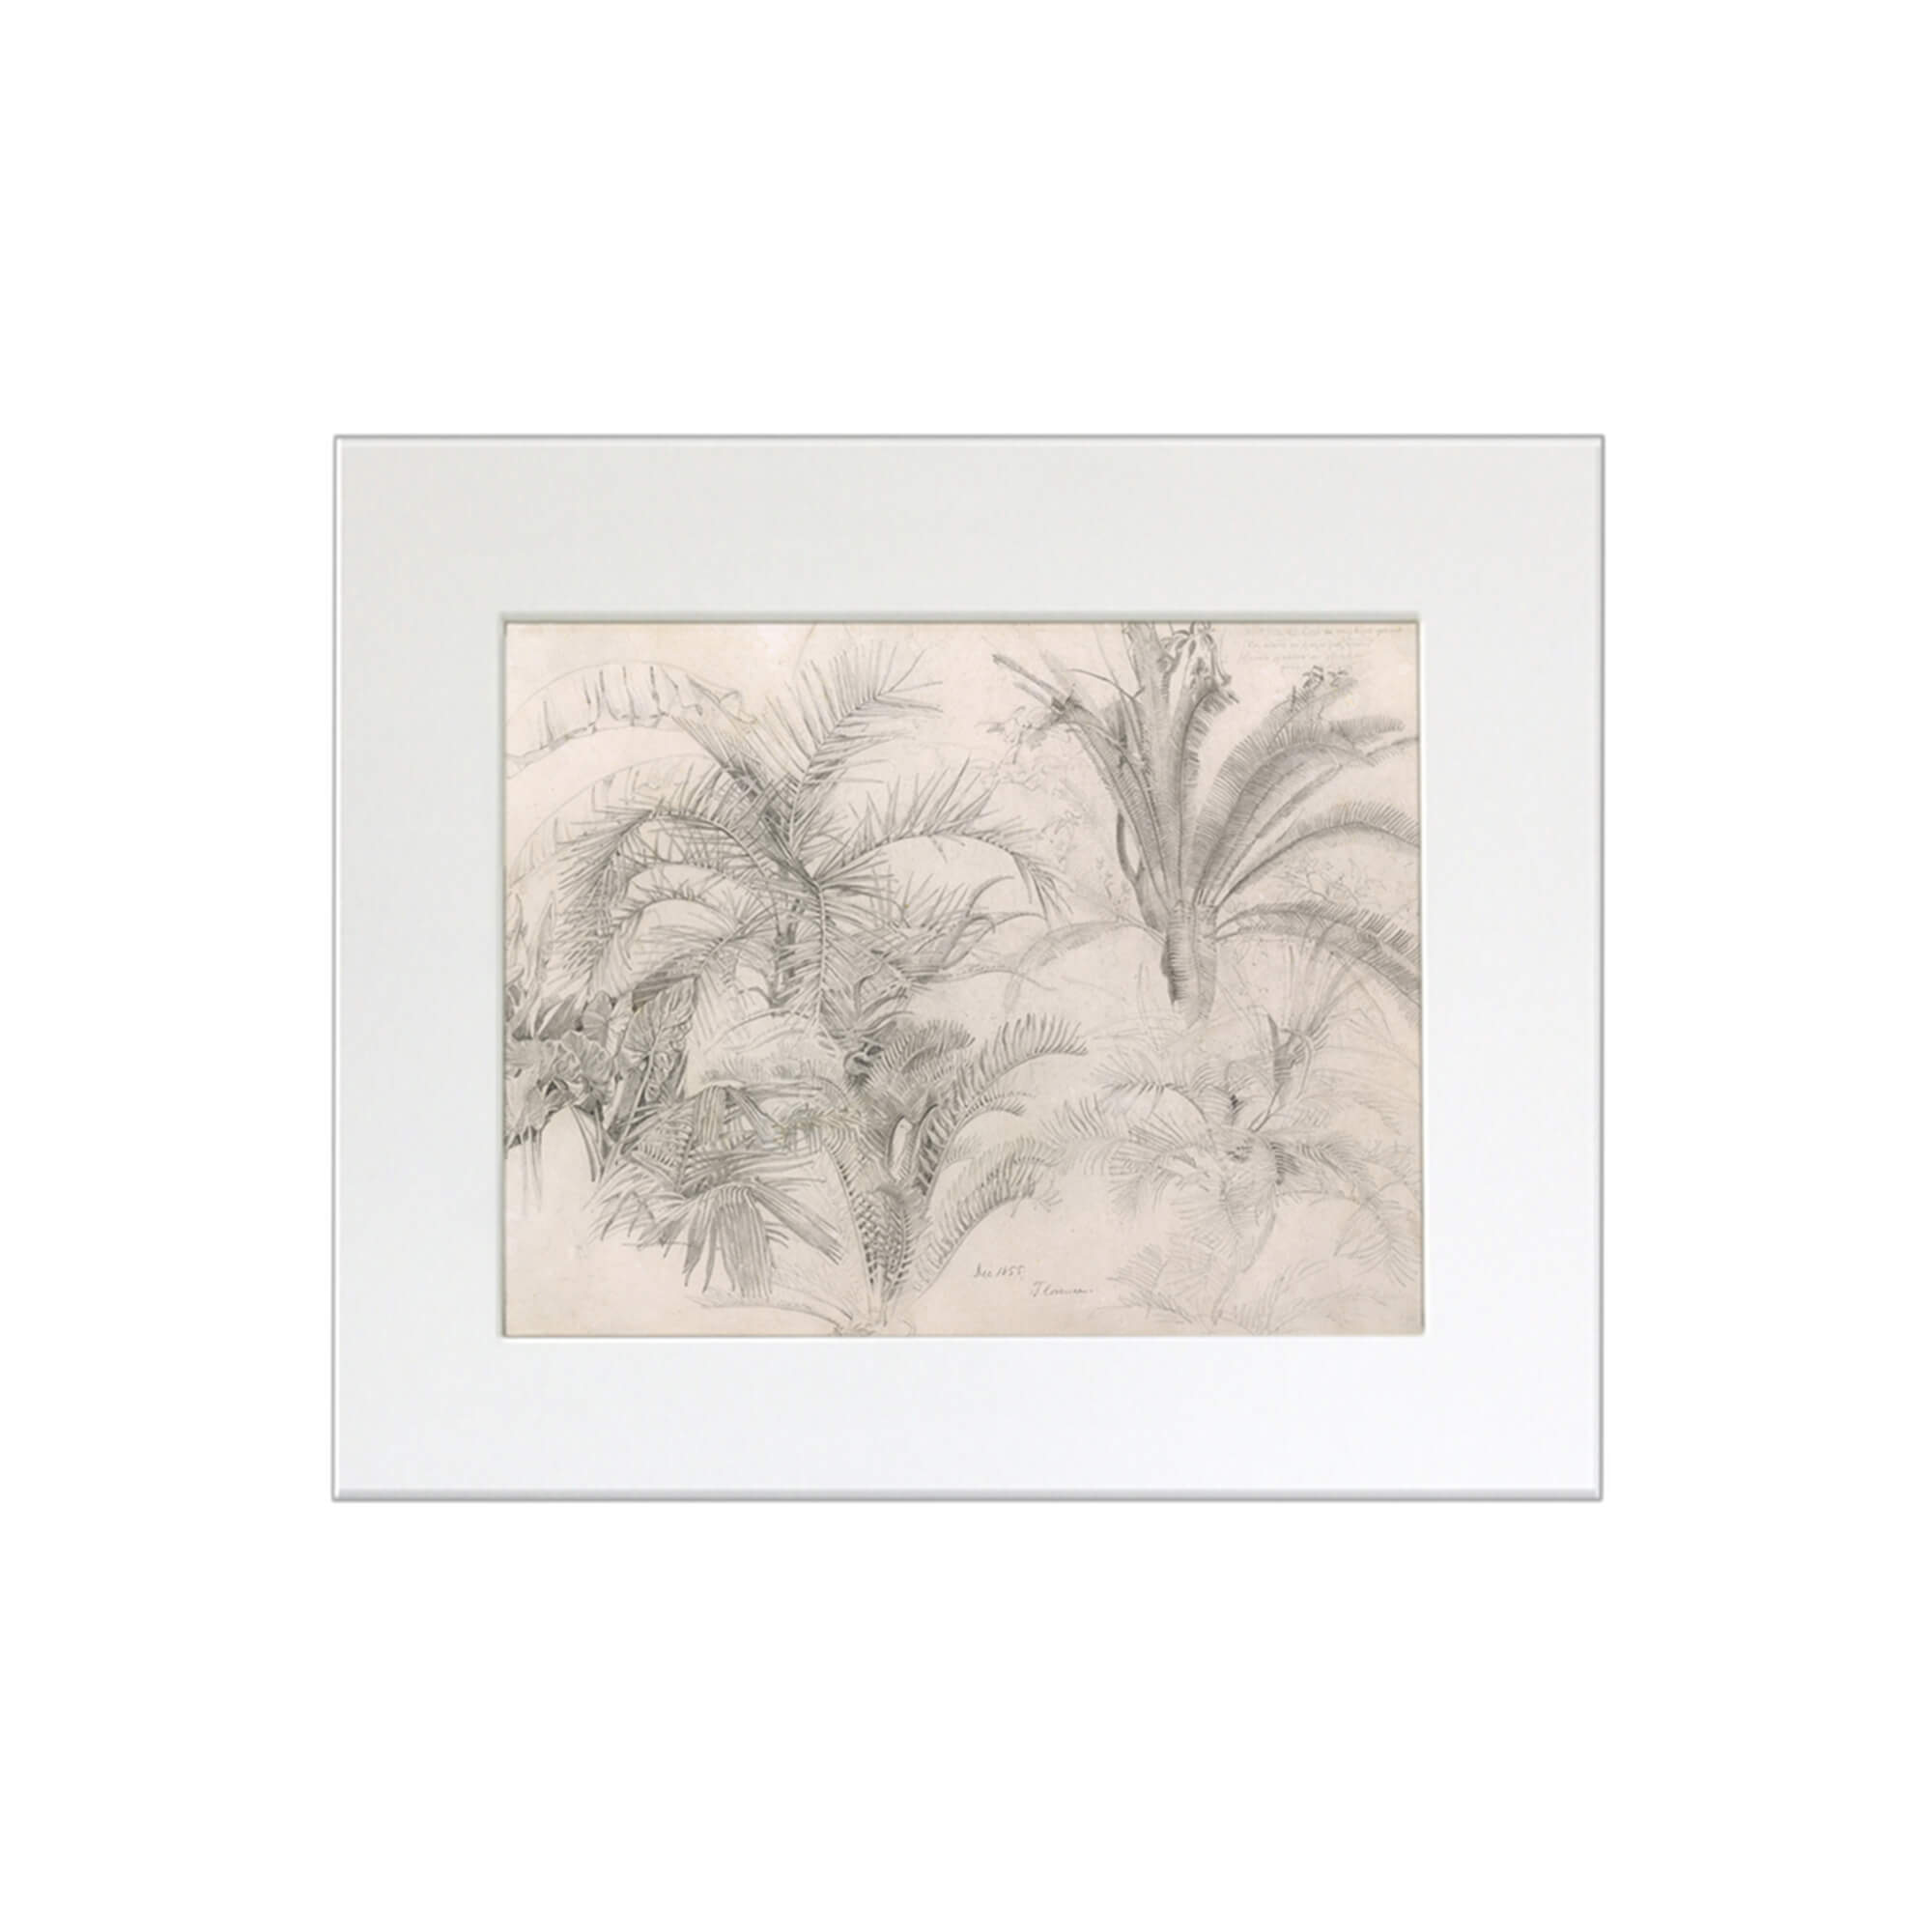 A sketch of palm trees in a mat